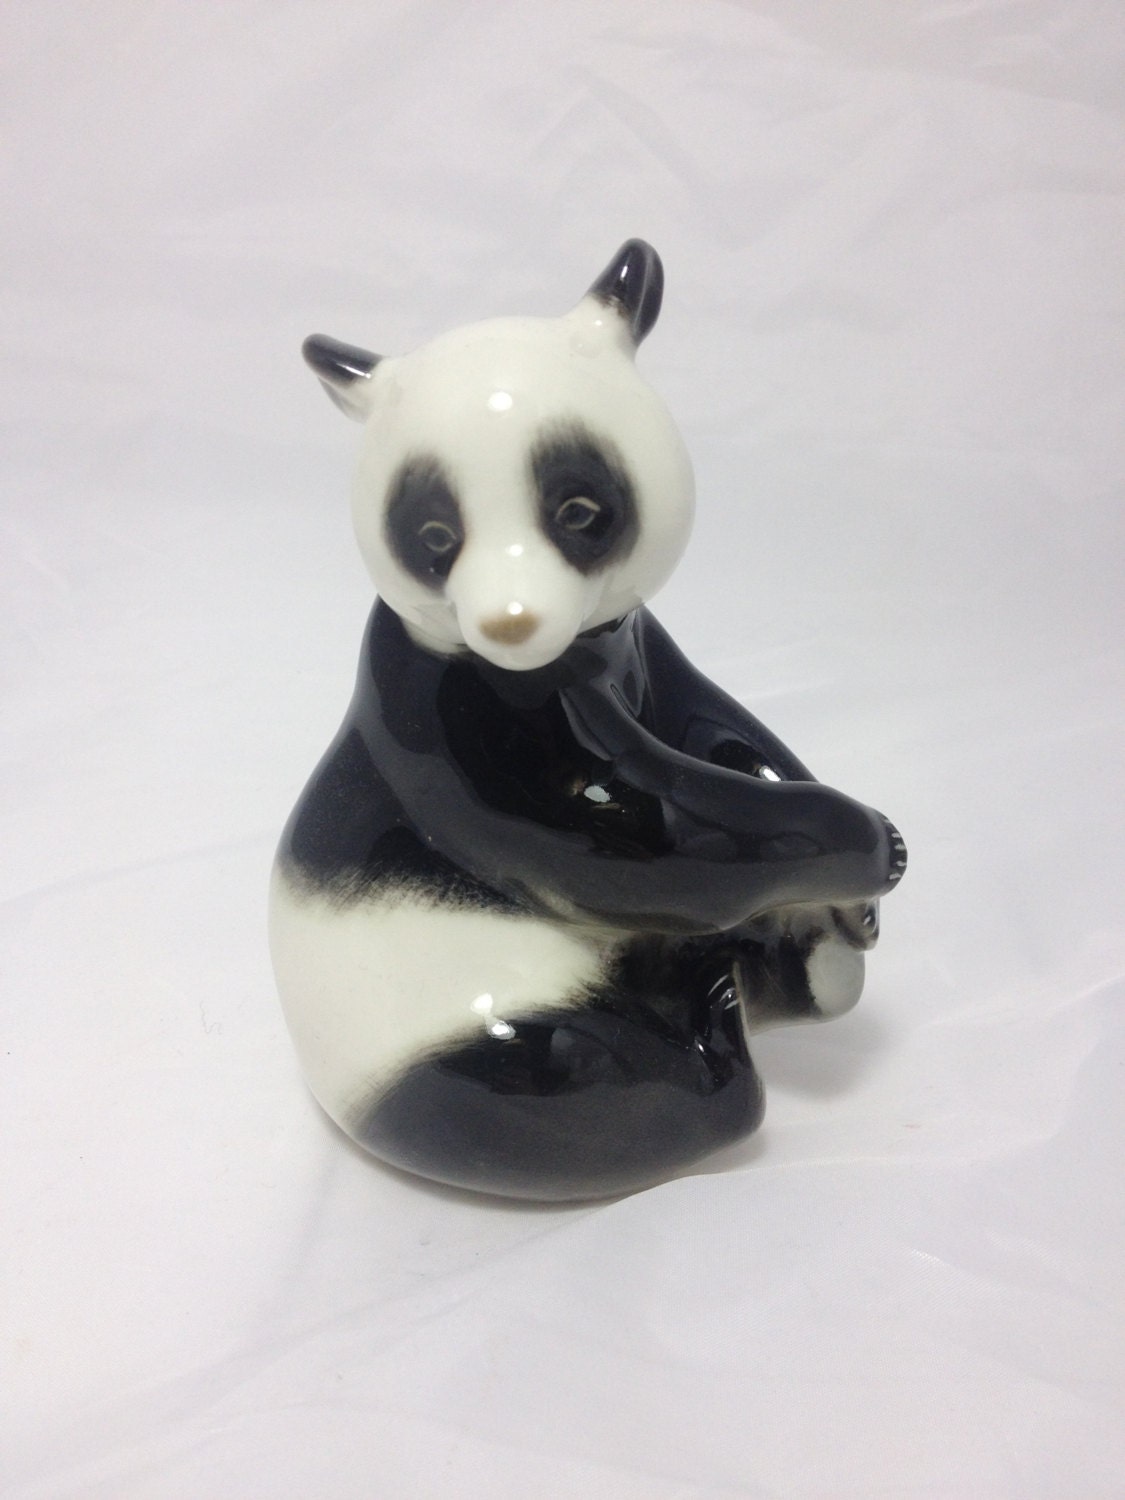 Vintage Panda Porcelain Animal Collectible Figurine Quirky